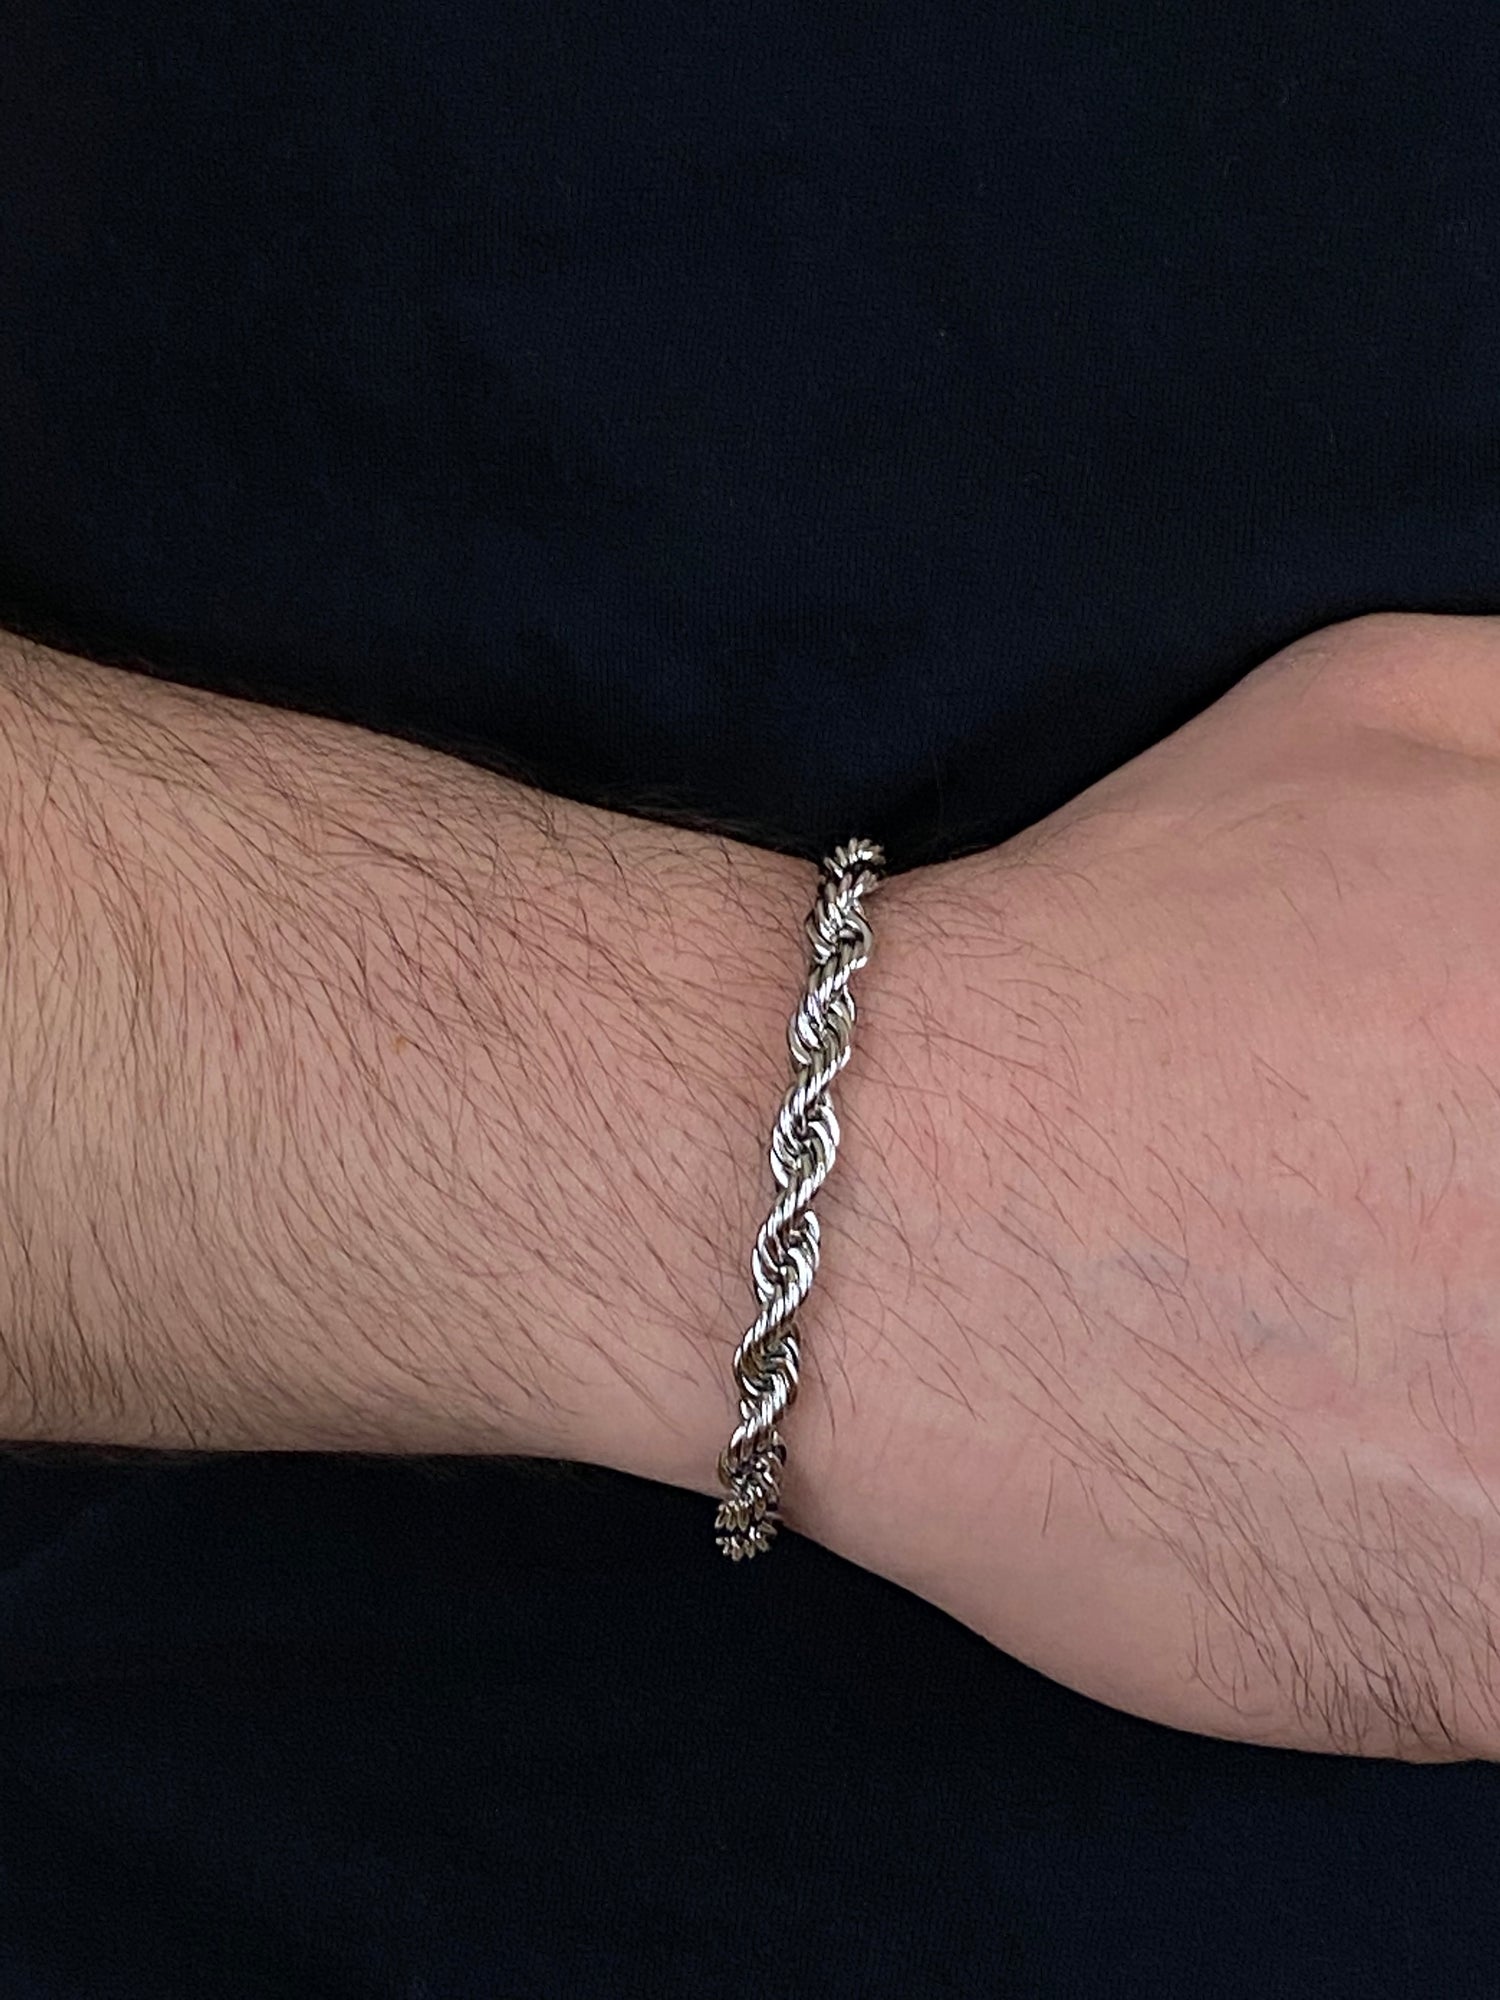 Amazon.com: Solid 14k White Gold 5.5mm Diamond-Cut Rope Chain Bracelet -  with Secure Lobster Lock Clasp 8